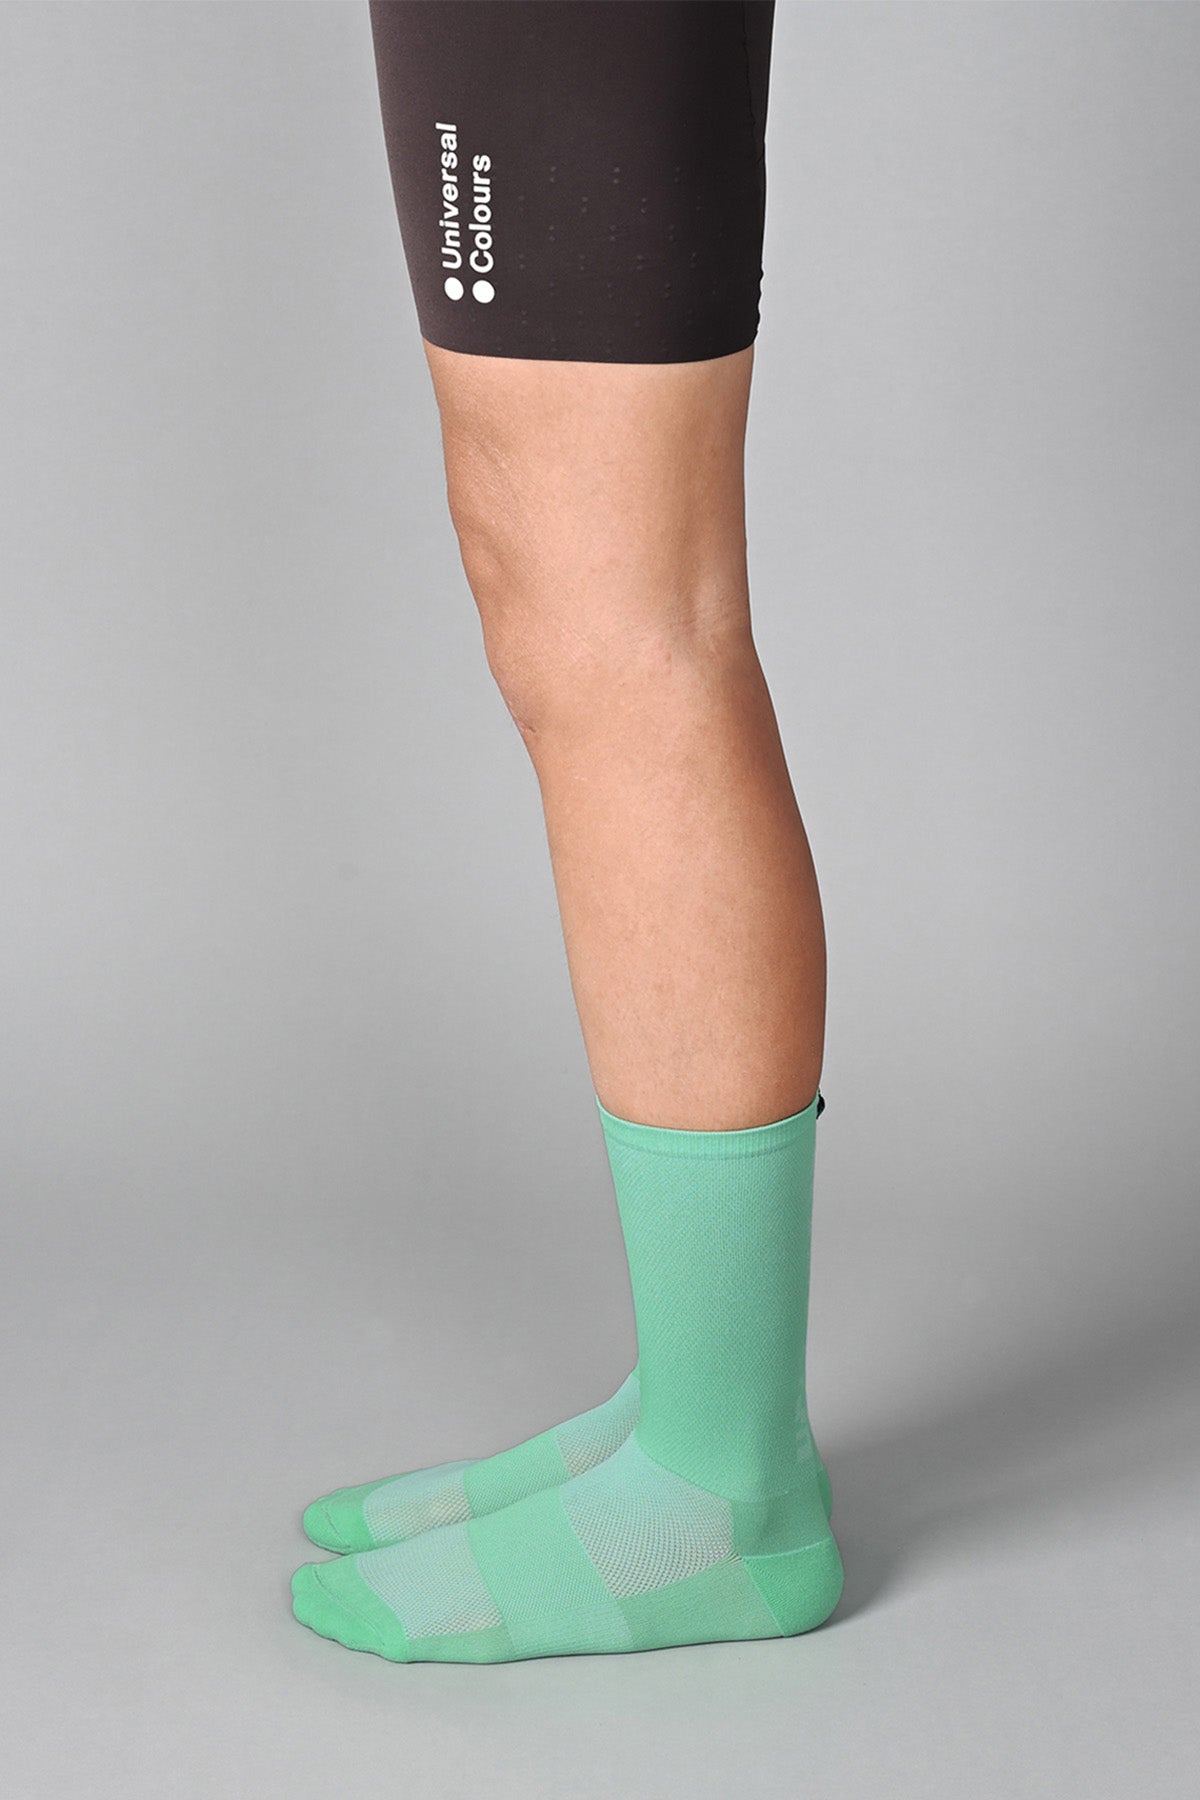 STEALTH - ANDROID GREEN SIDE | BEST CYCLING SOCKS